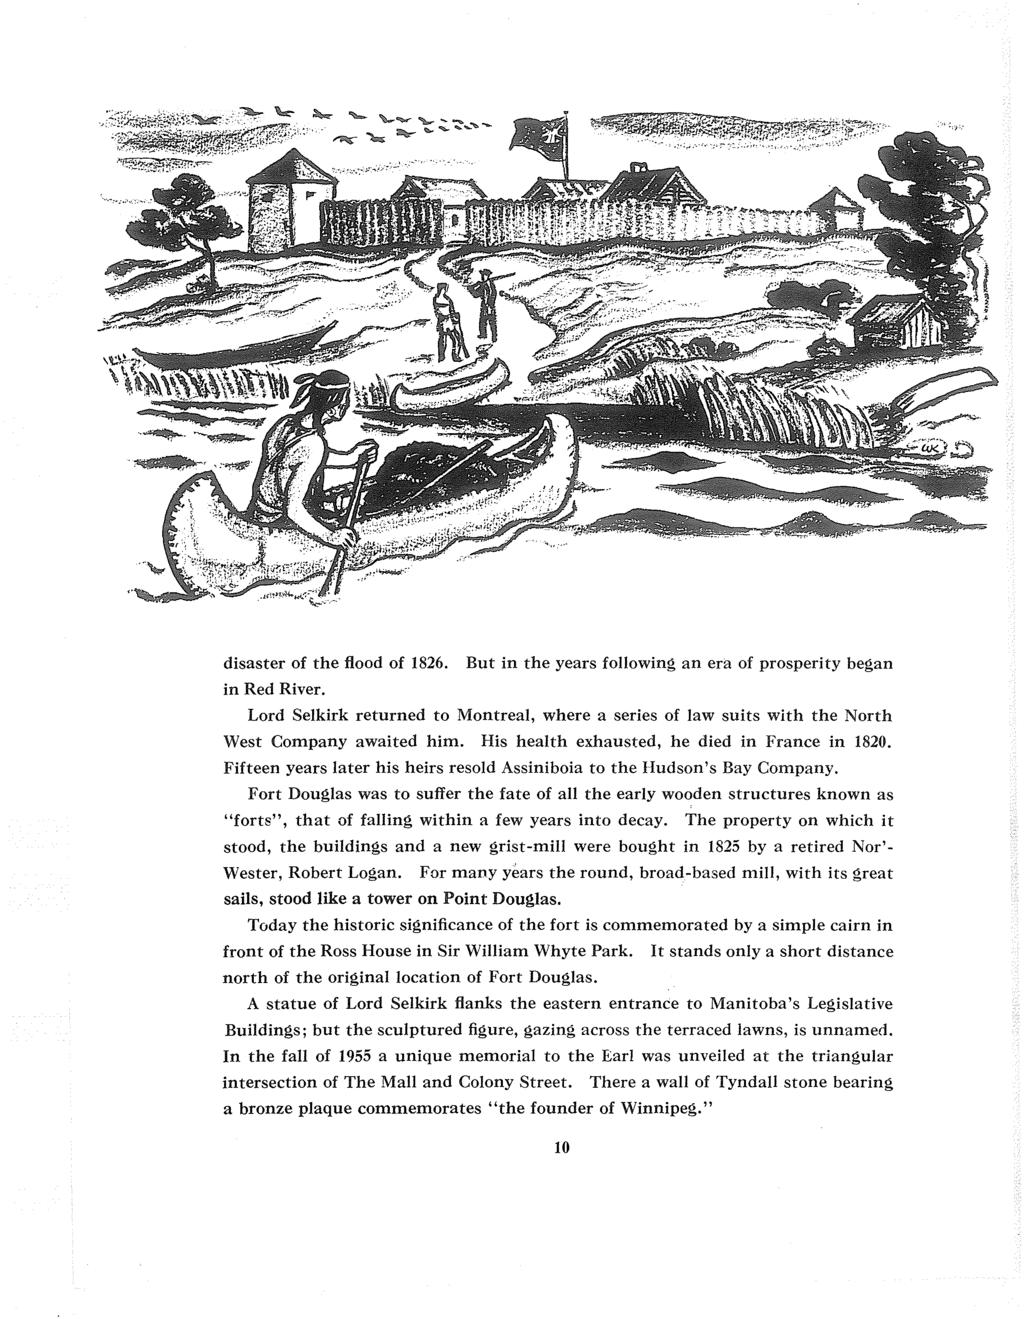 disaster of the flood of 1826. But in the years following an era of prosperity began in Red River.